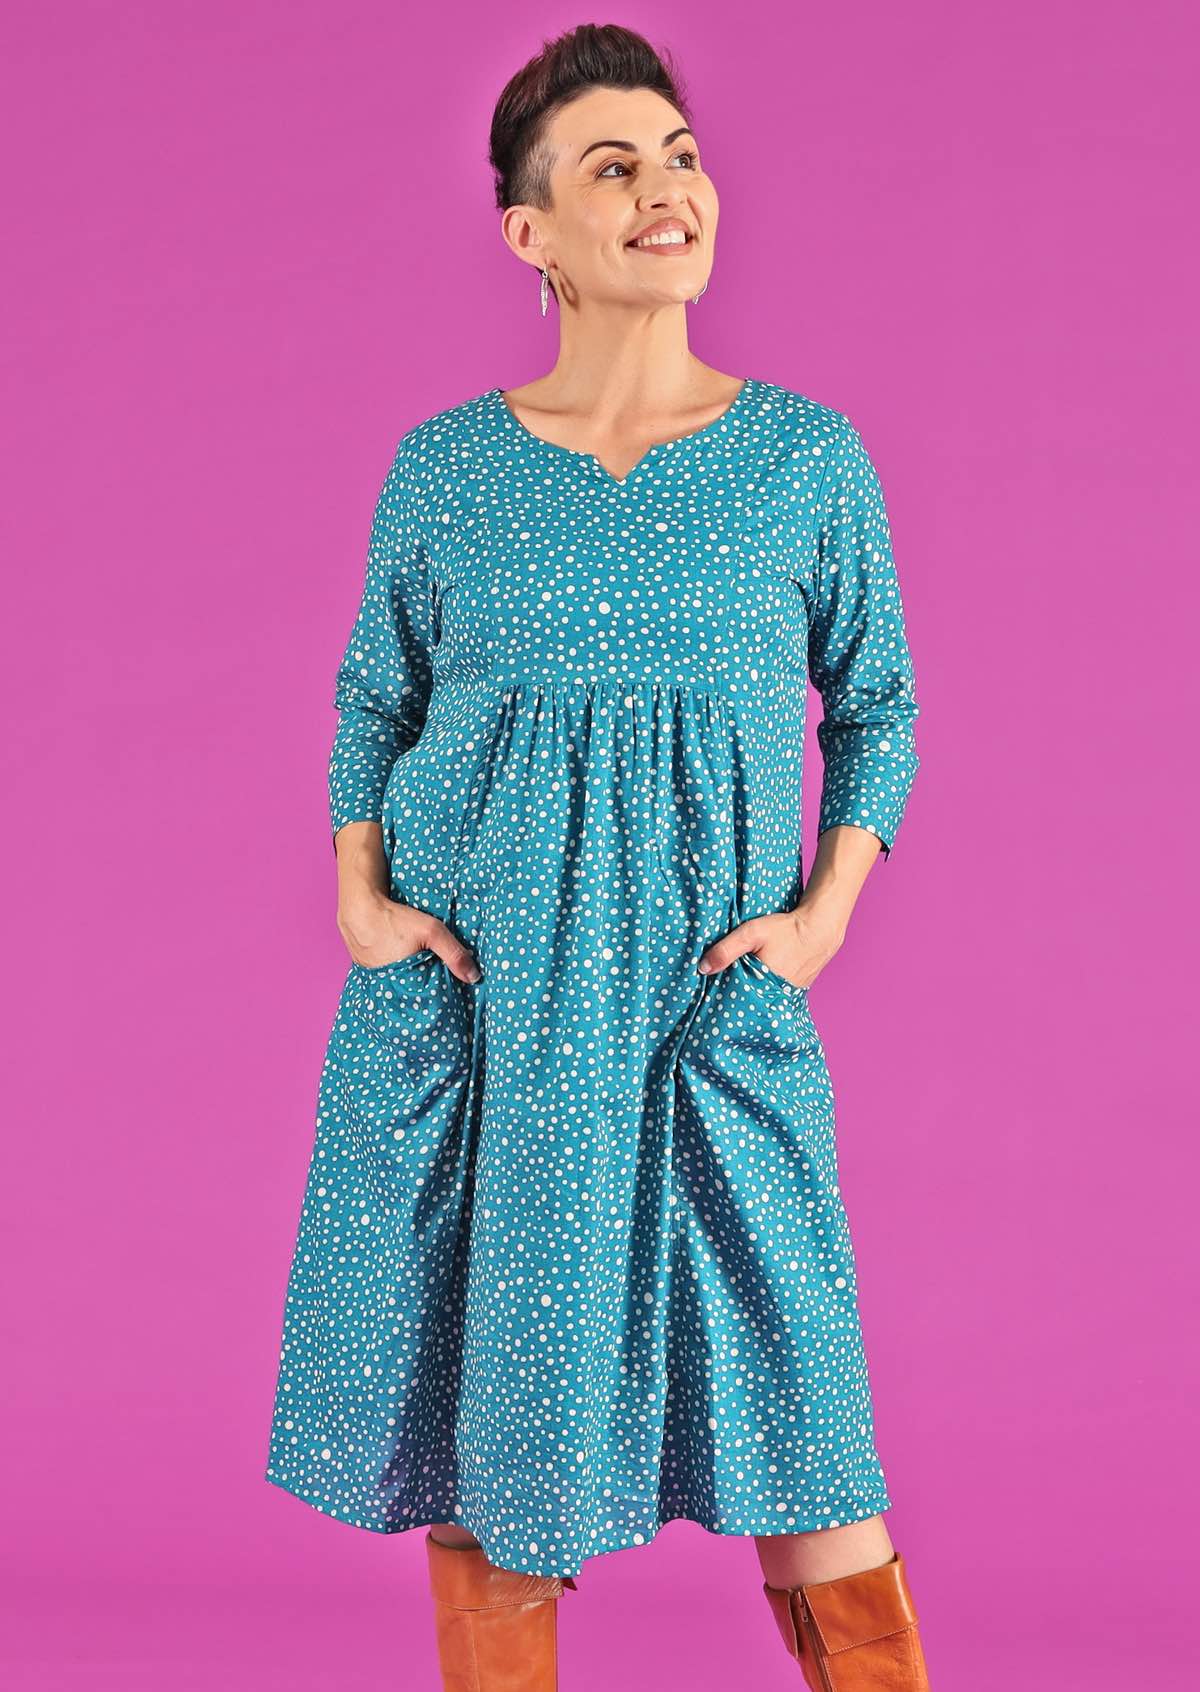 cotton teal polkadot lined dress with pockets